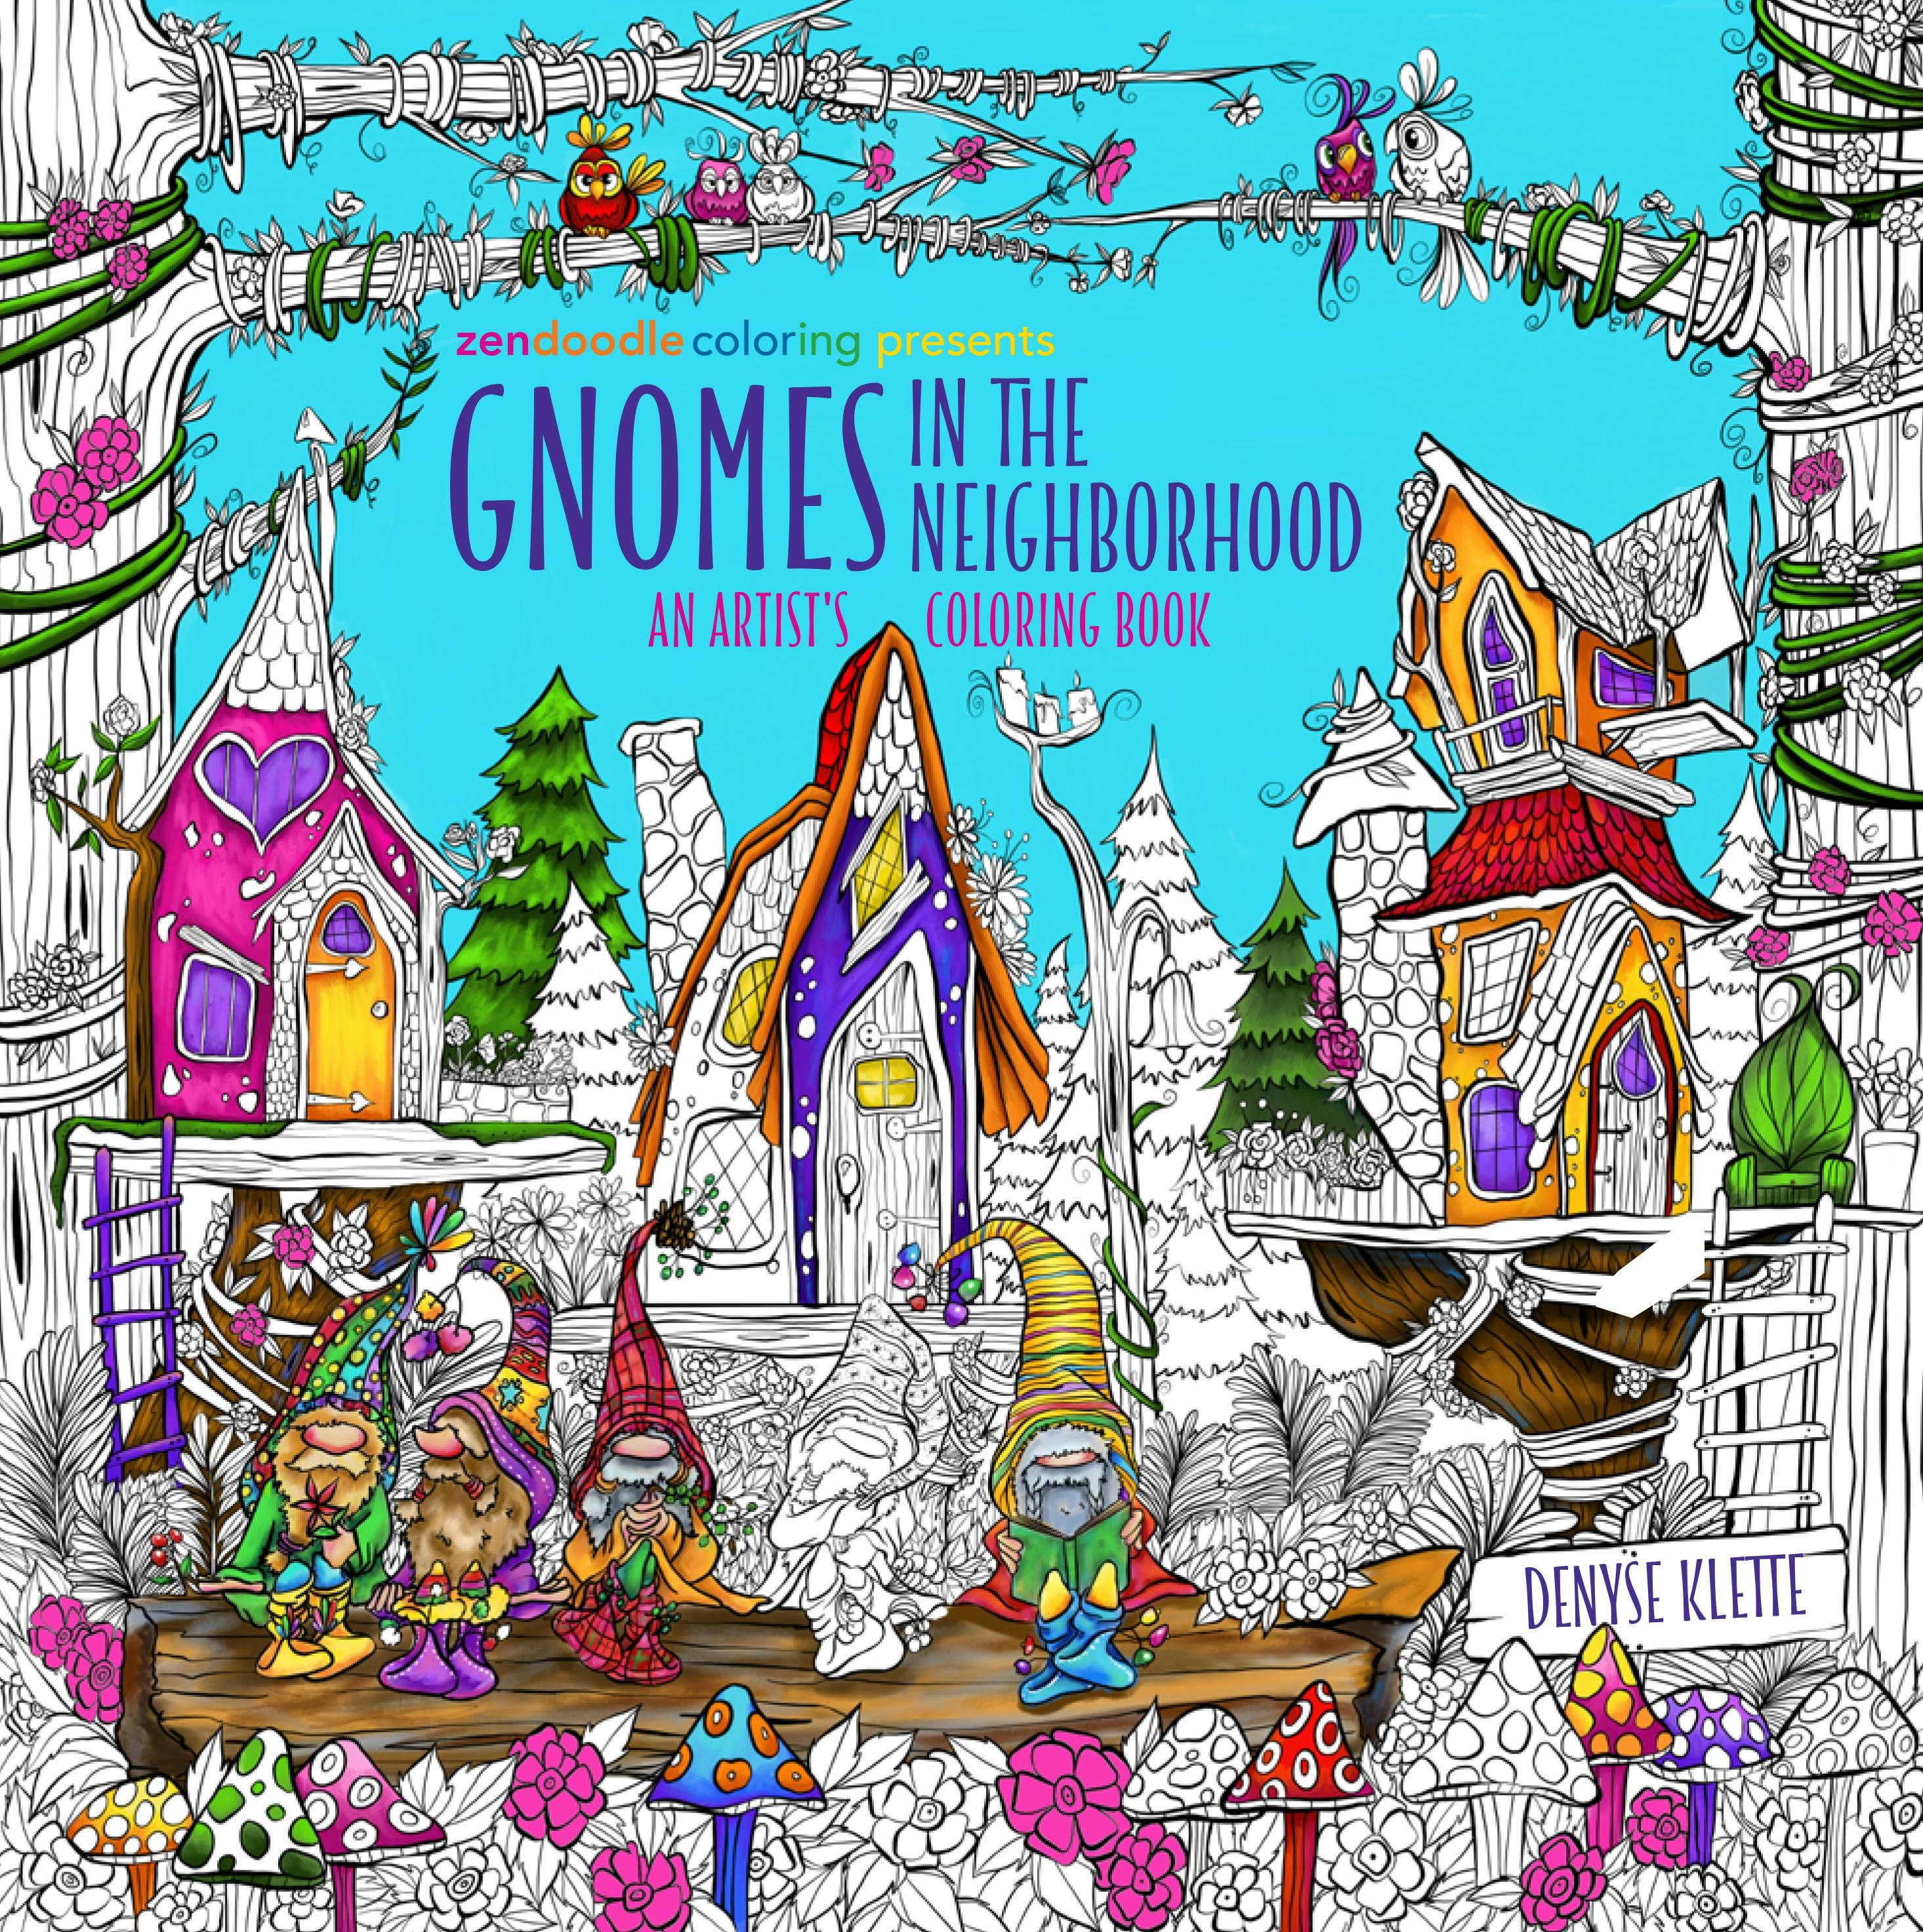 Zendoodle Coloring Presents Gnomes in the Neighborhood